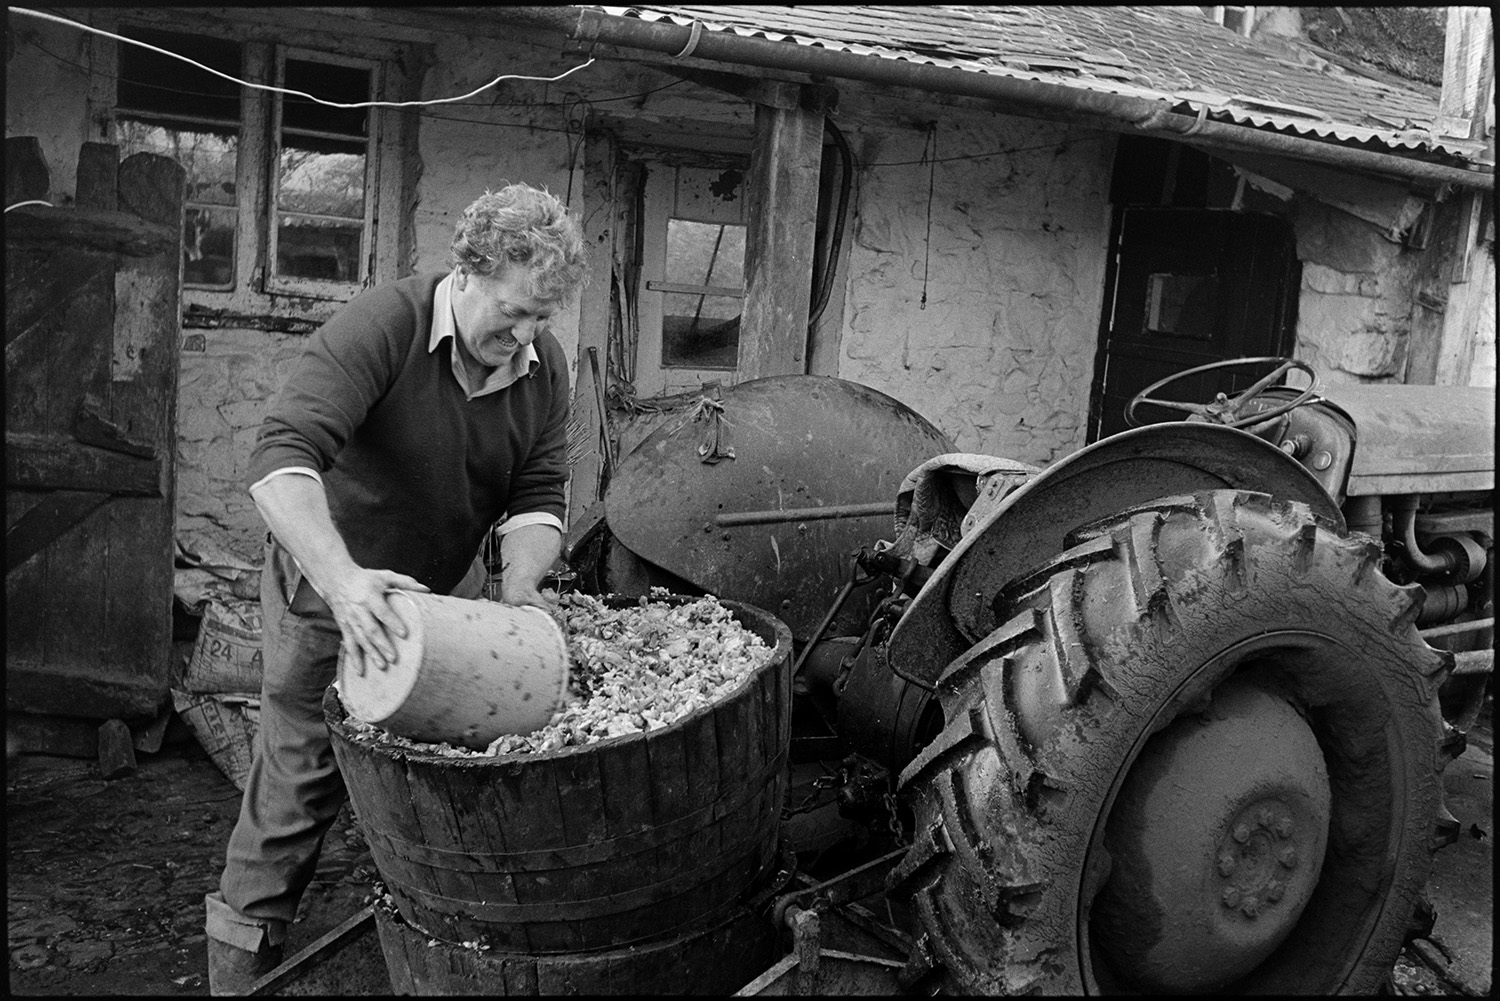 Cider making, apple crusher and cider press. 
[A man scooping apple pulp out of a barrel attached to a tractor, with a bucket, at Rashleigh Mill, Bridge Reeve.]